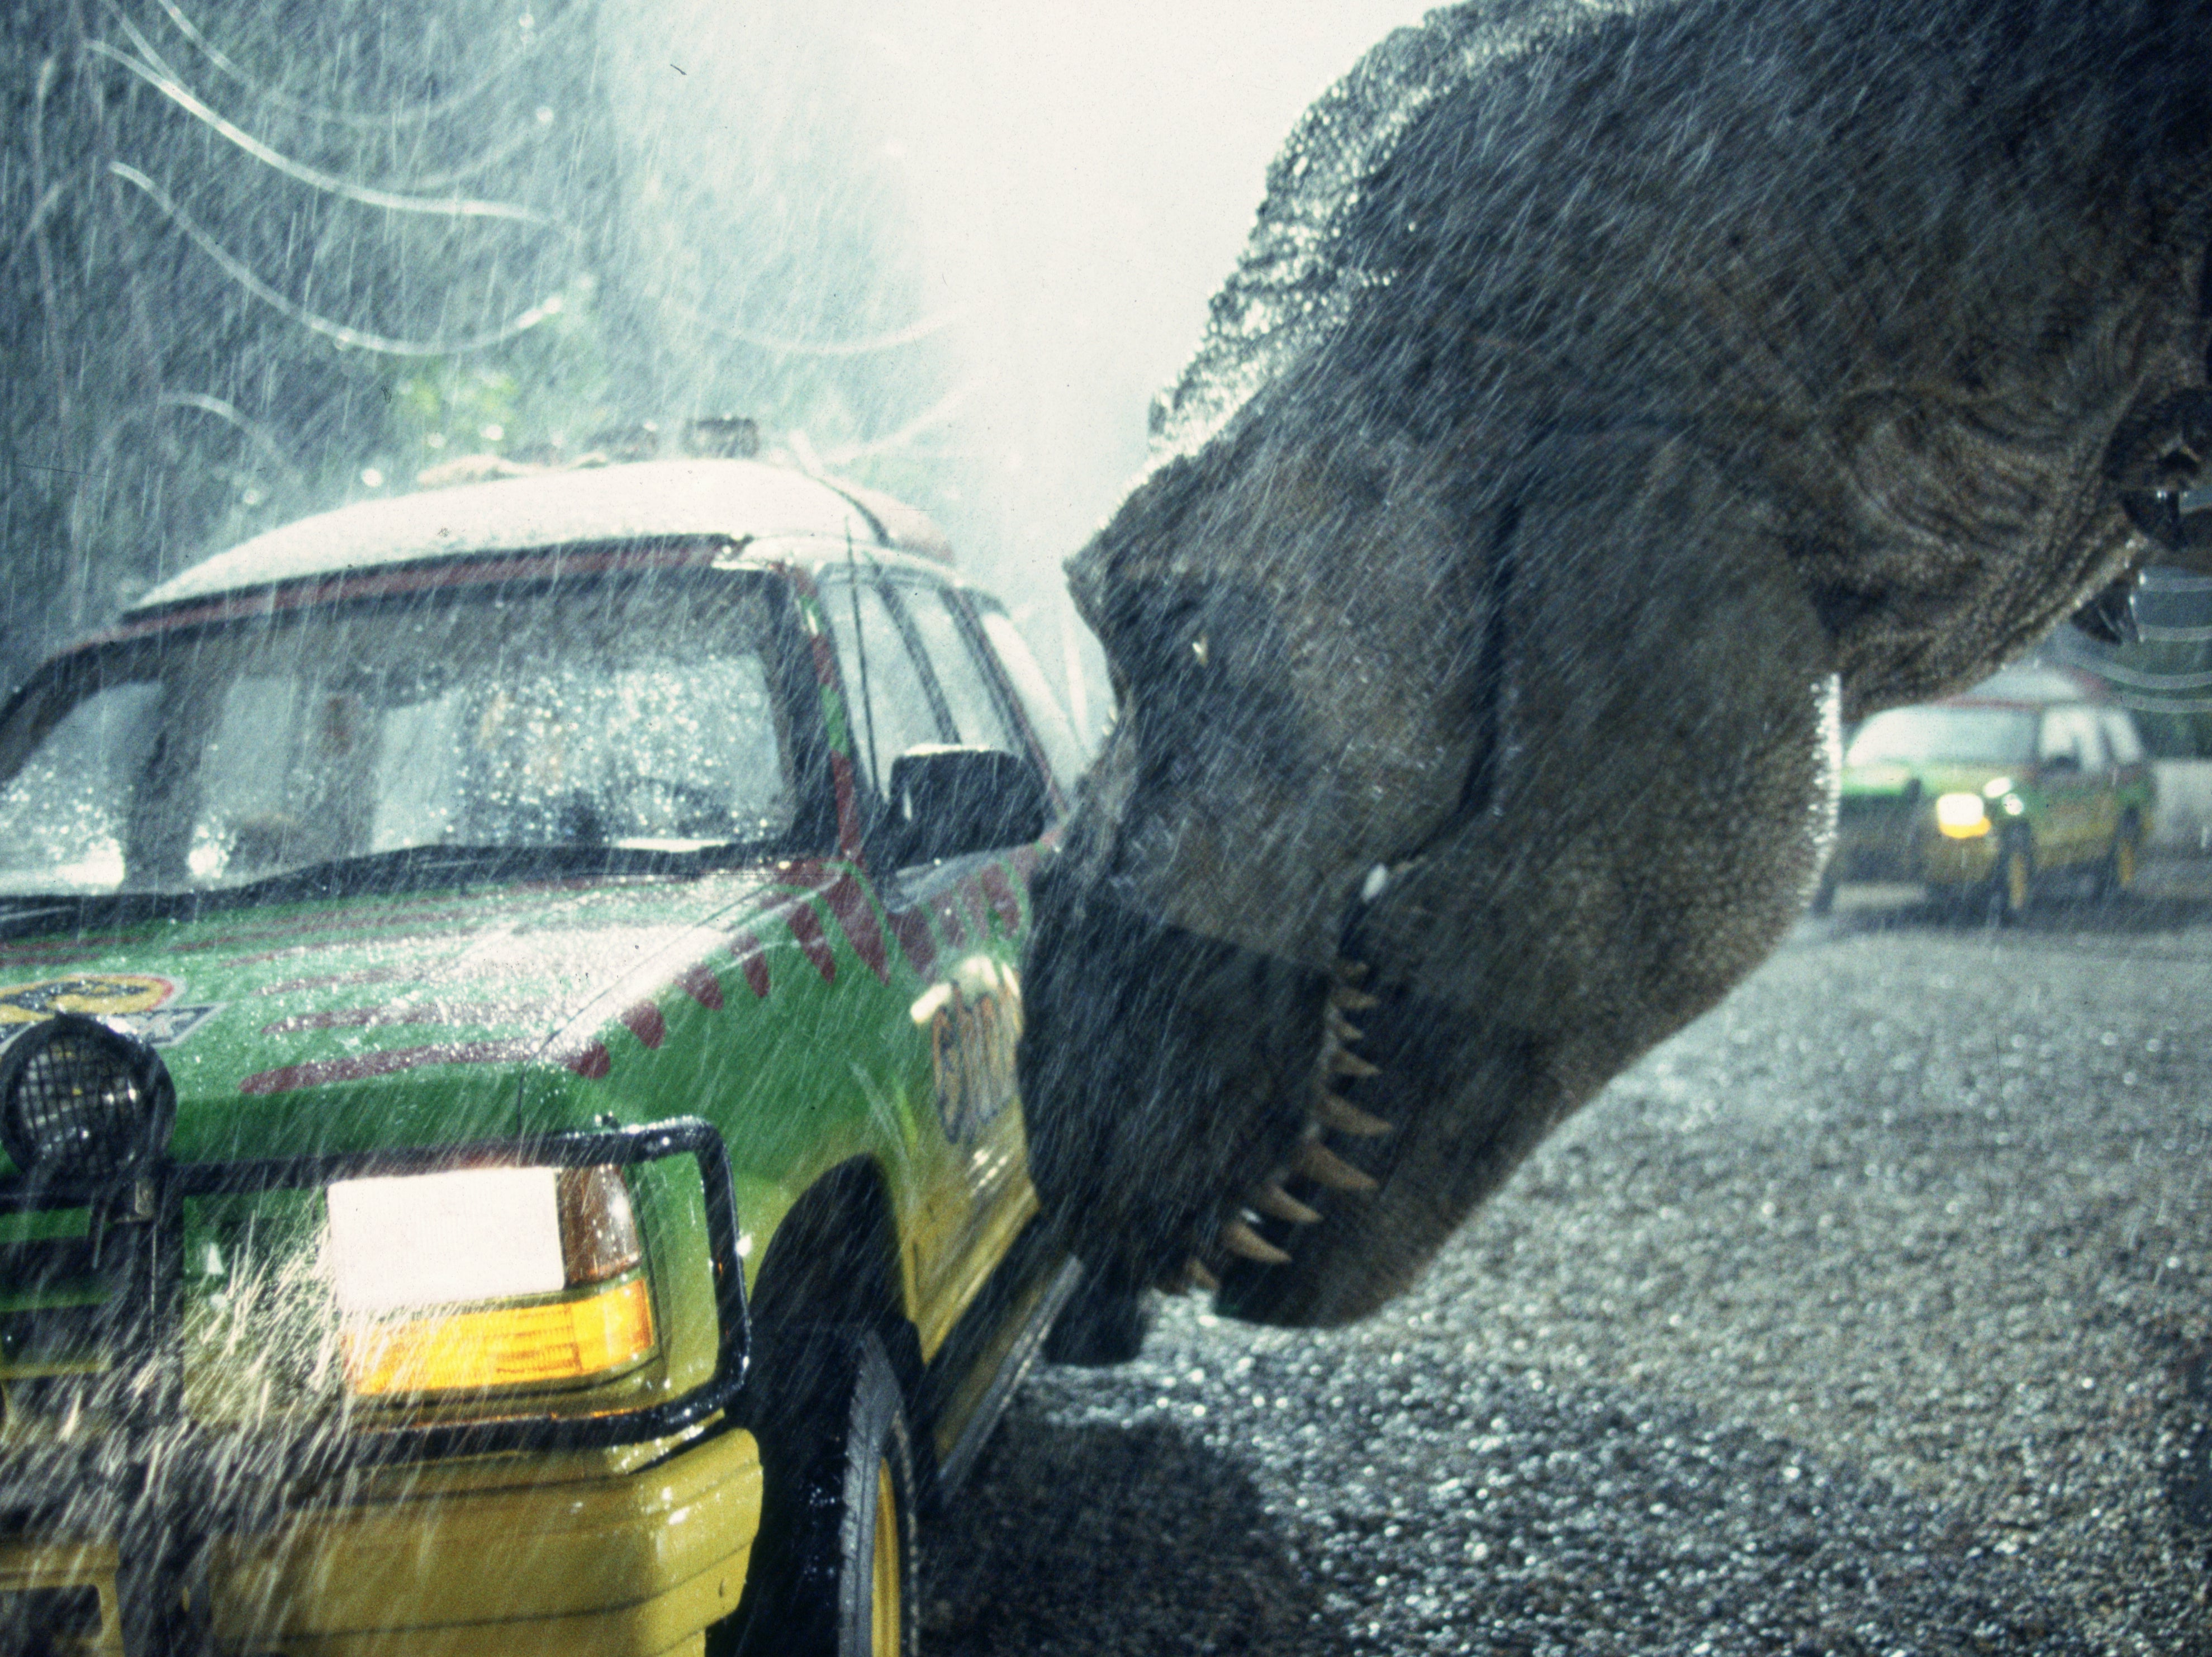 ‘Jurassic Park’ became an era-defining blockbuster when it first came out in 1993